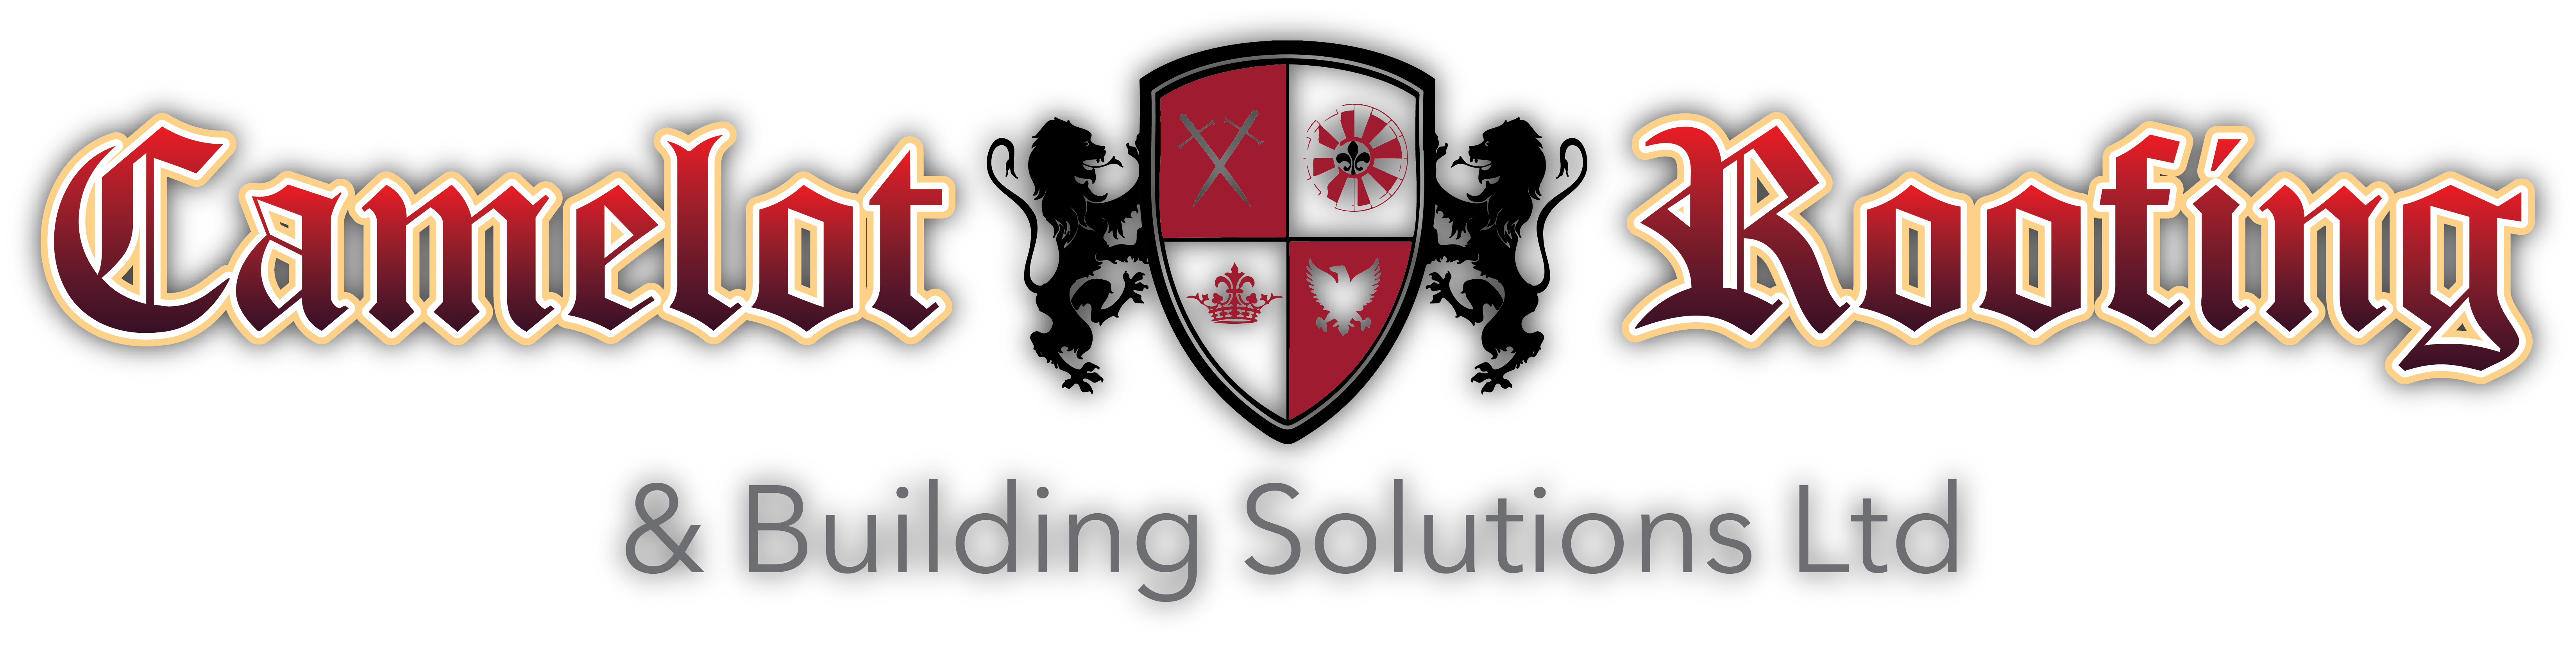 Camelot Roofing & Building Solutions Ltd company logo